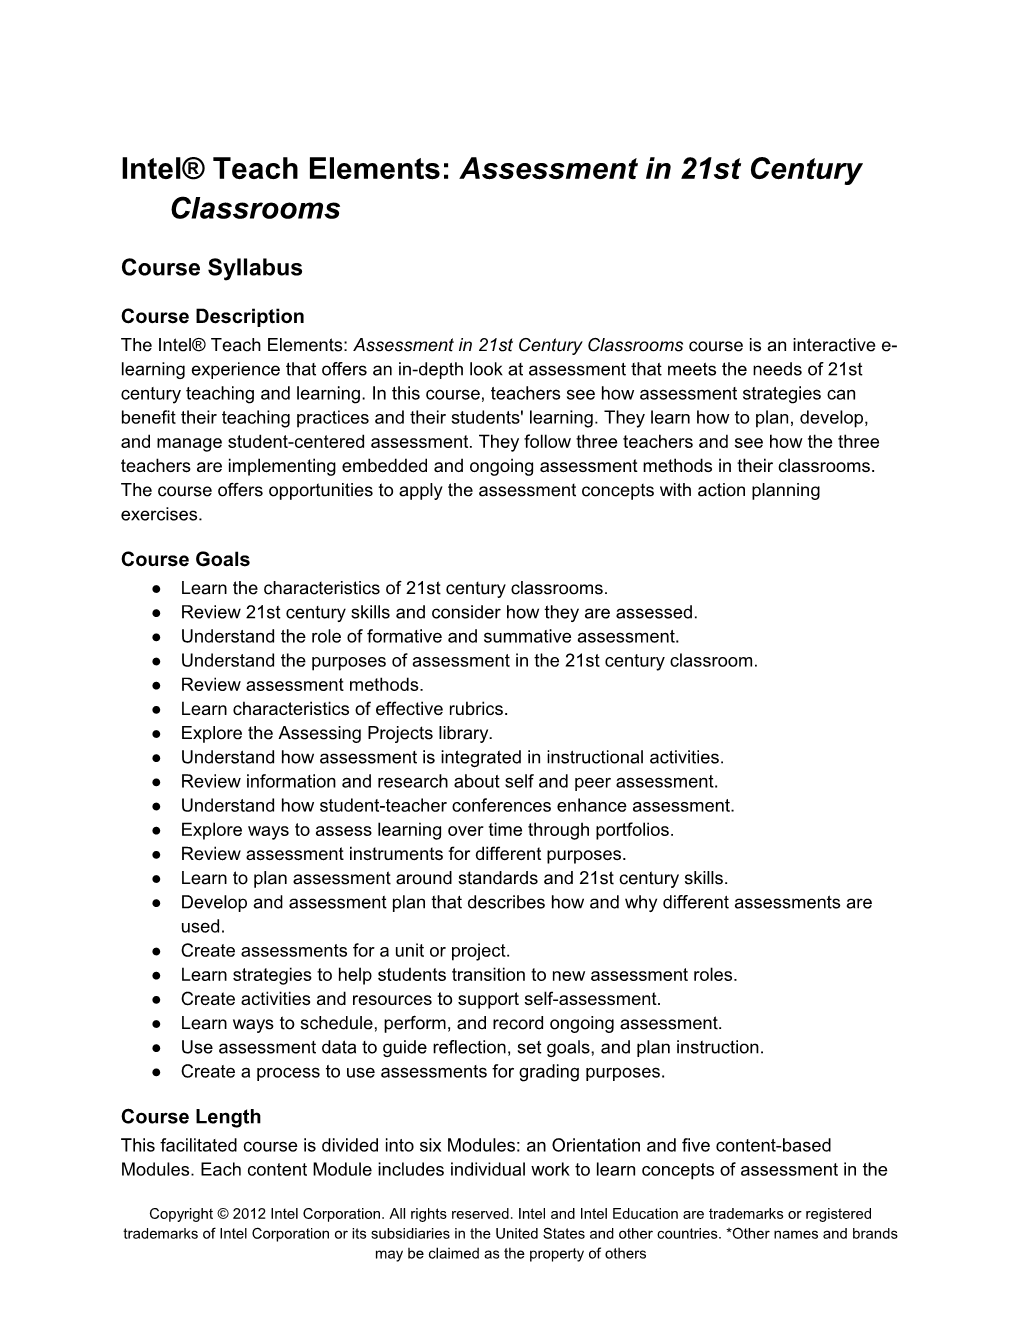 Intel Teach Elements: Assessment in 21St Century Classrooms